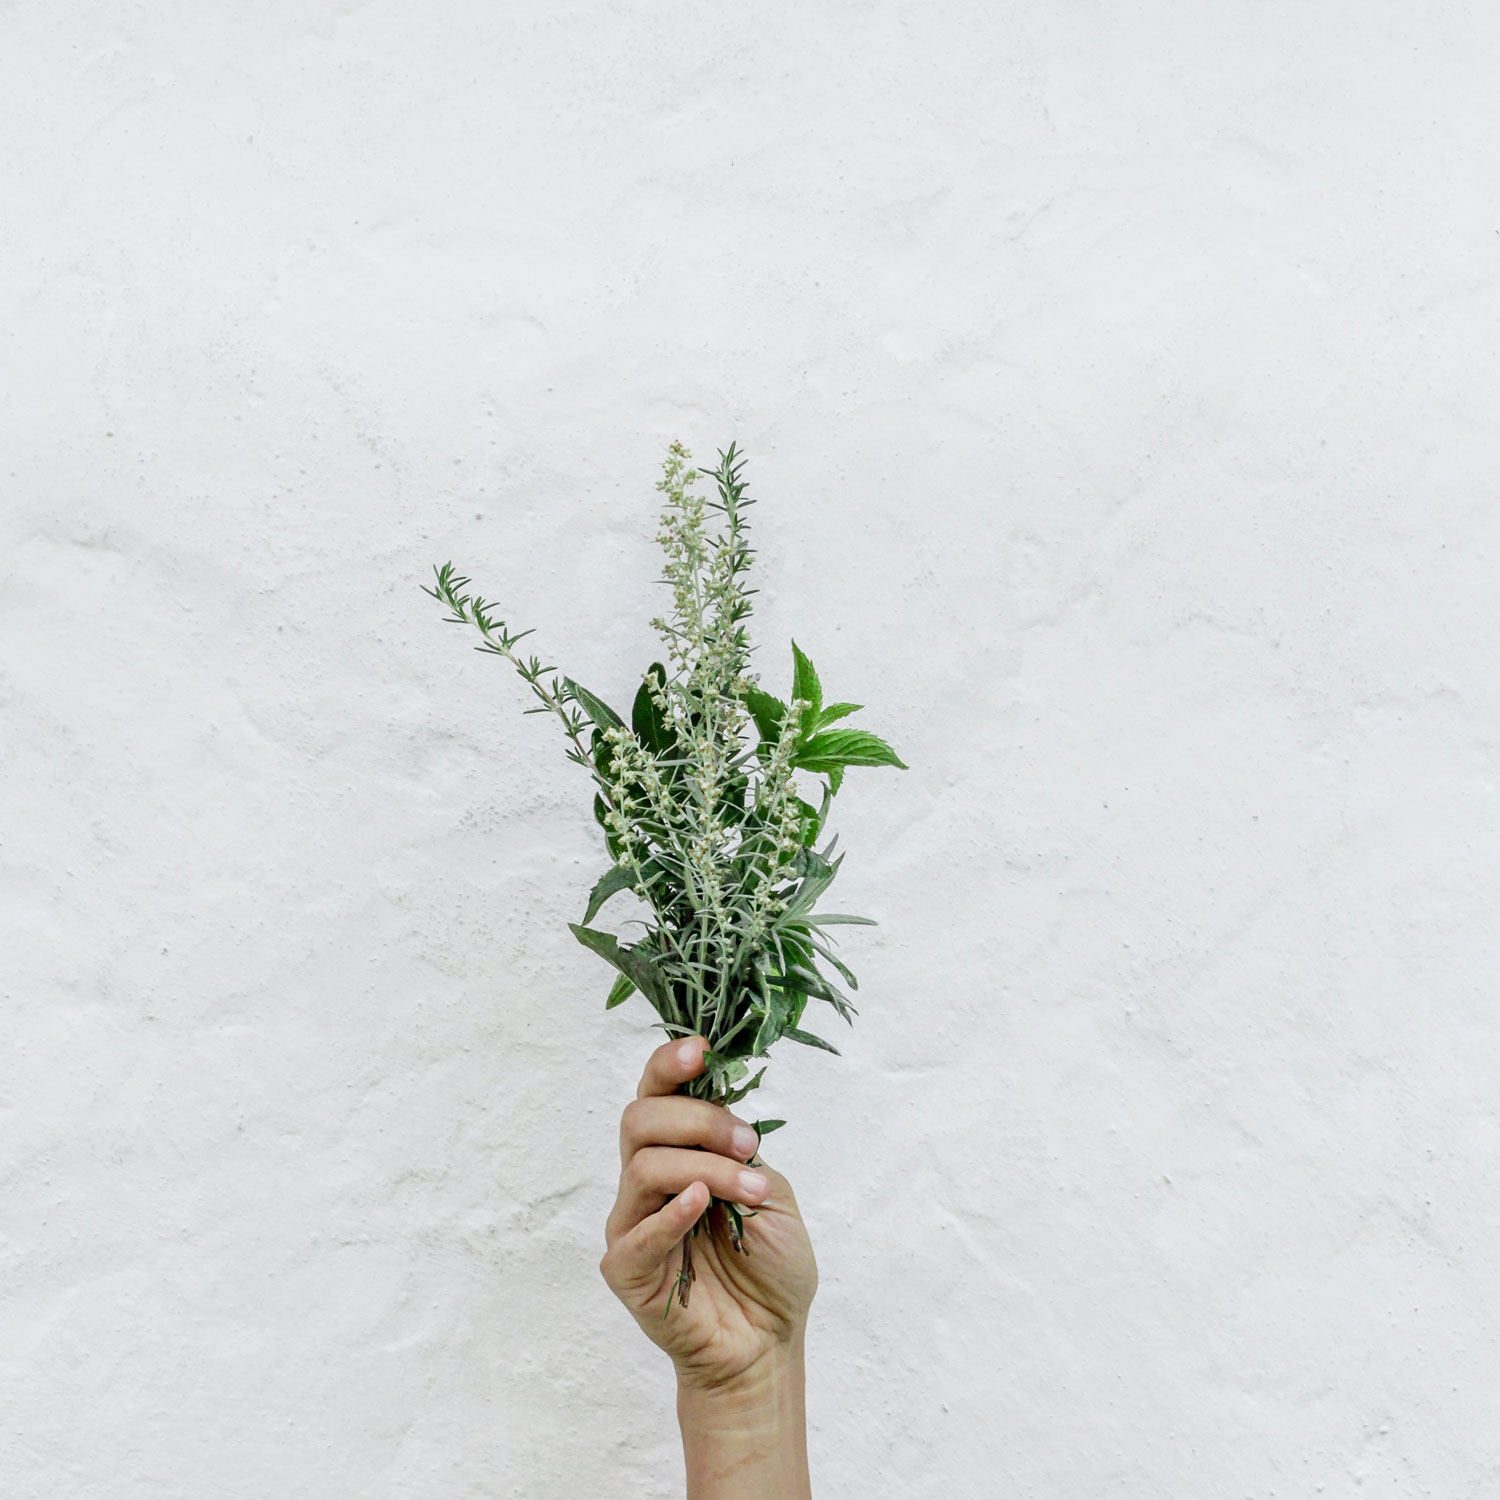 Hand holding herbs against a white wall